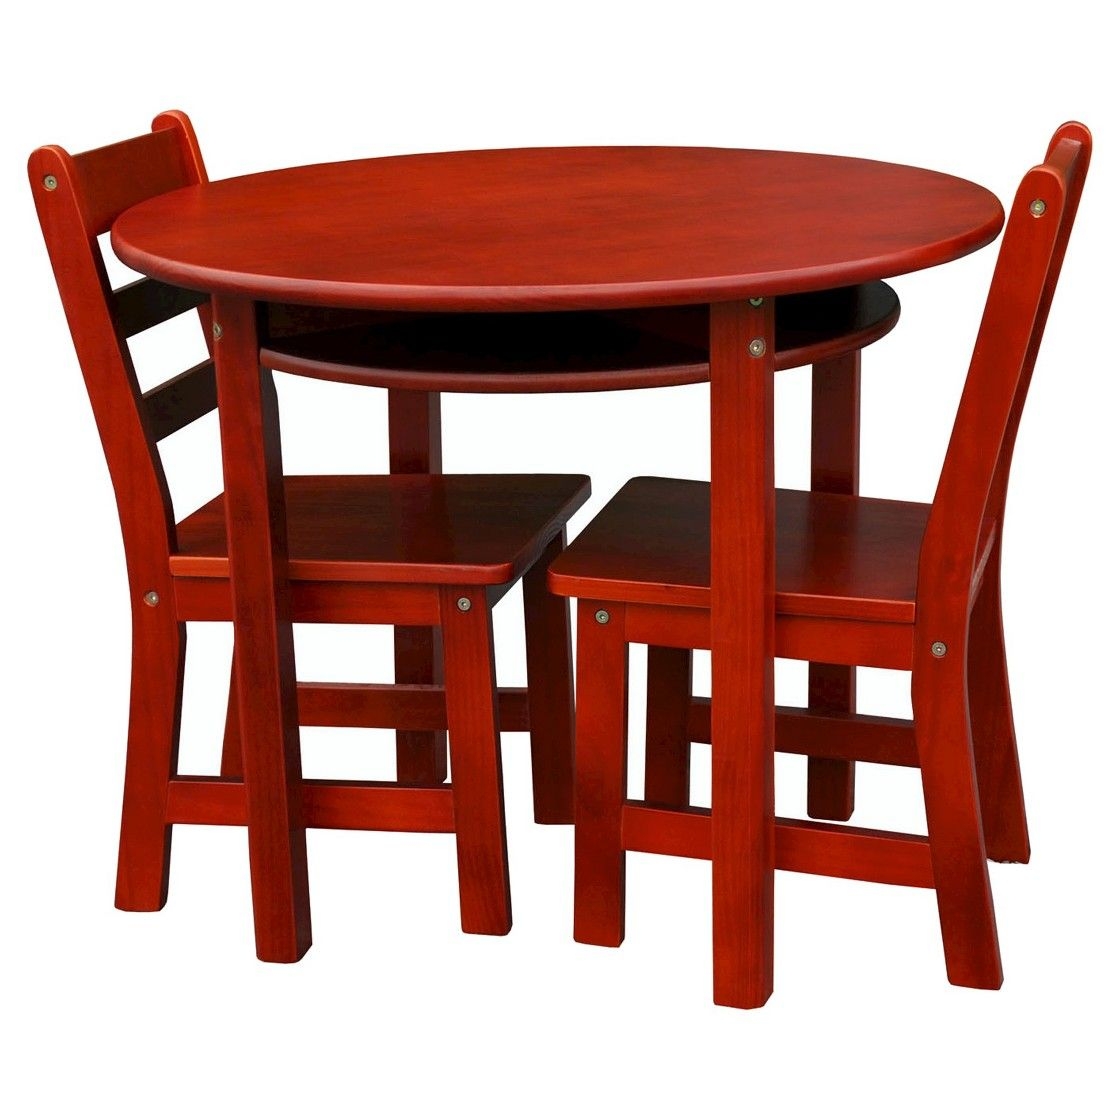 Kids round table and chairs 3